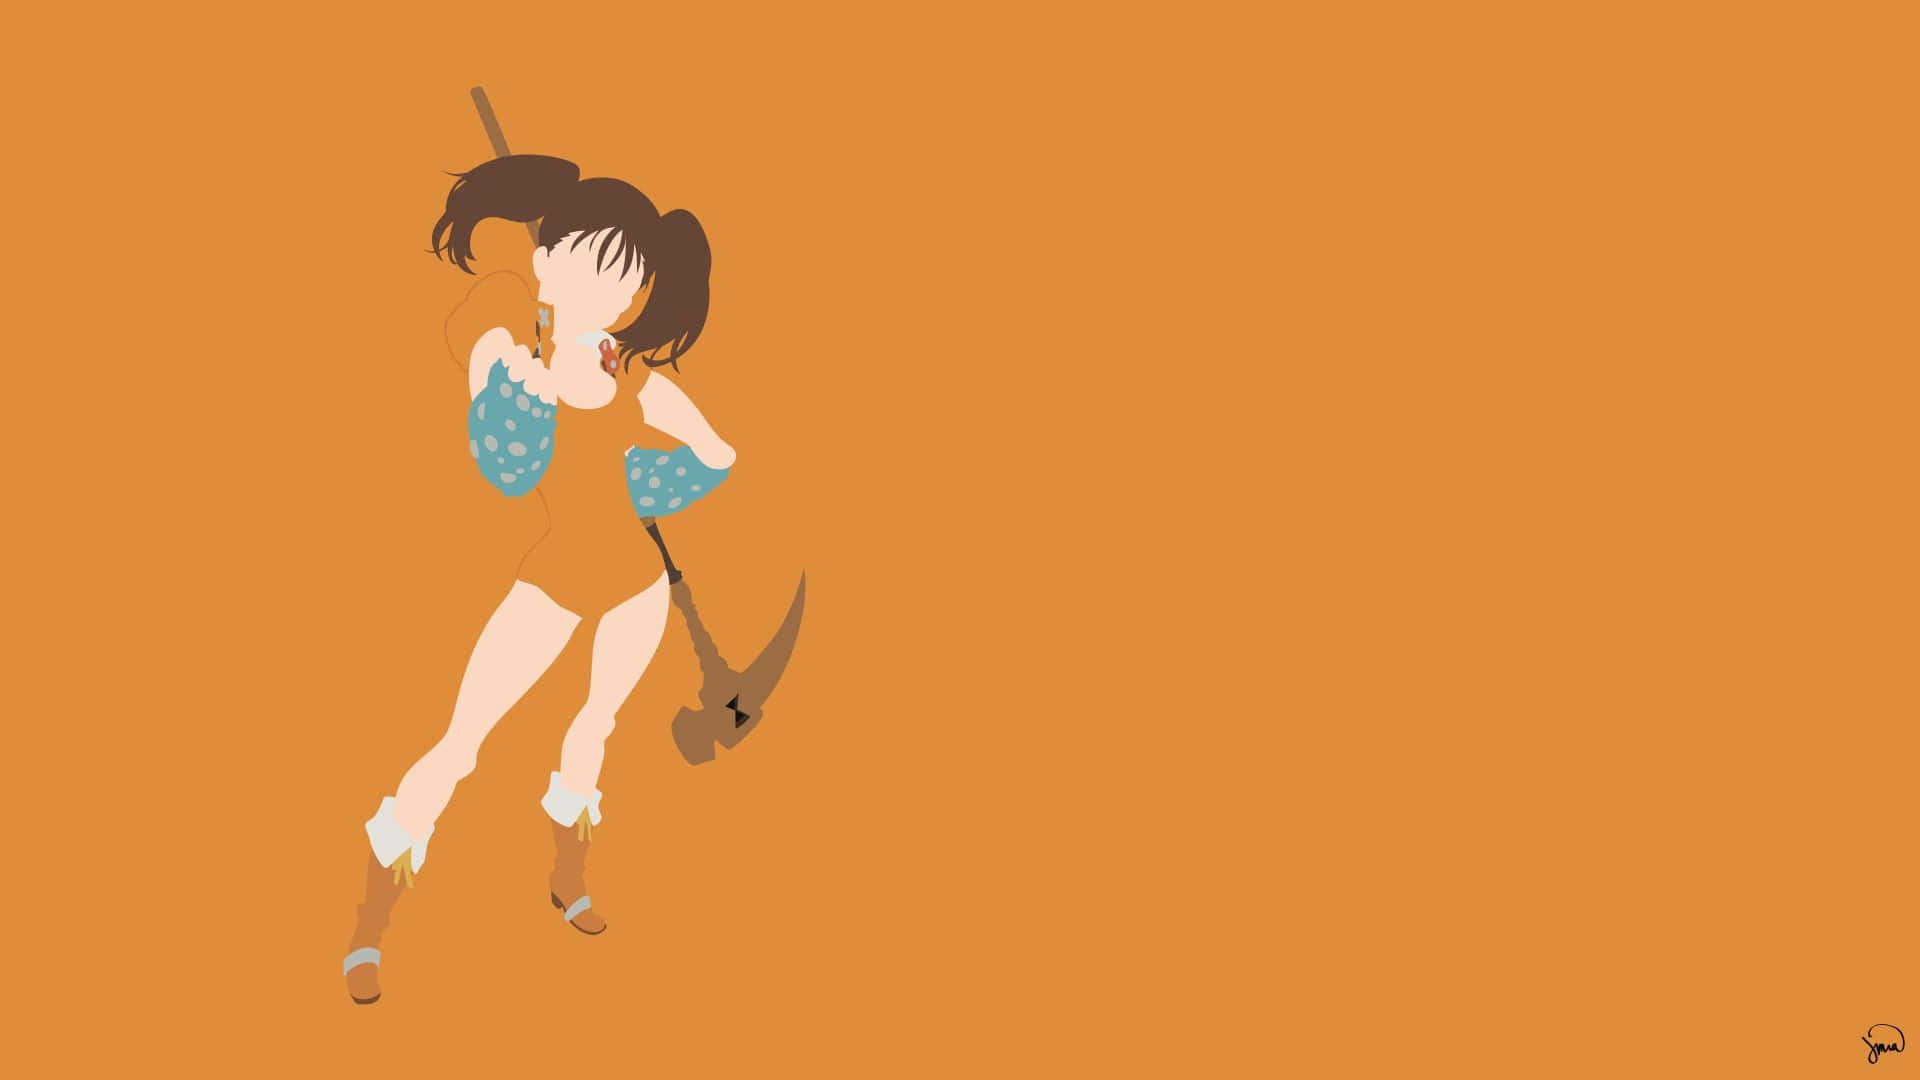 Diane, the Serpent Sin of Envy from Seven Deadly Sins in a striking pose Wallpaper